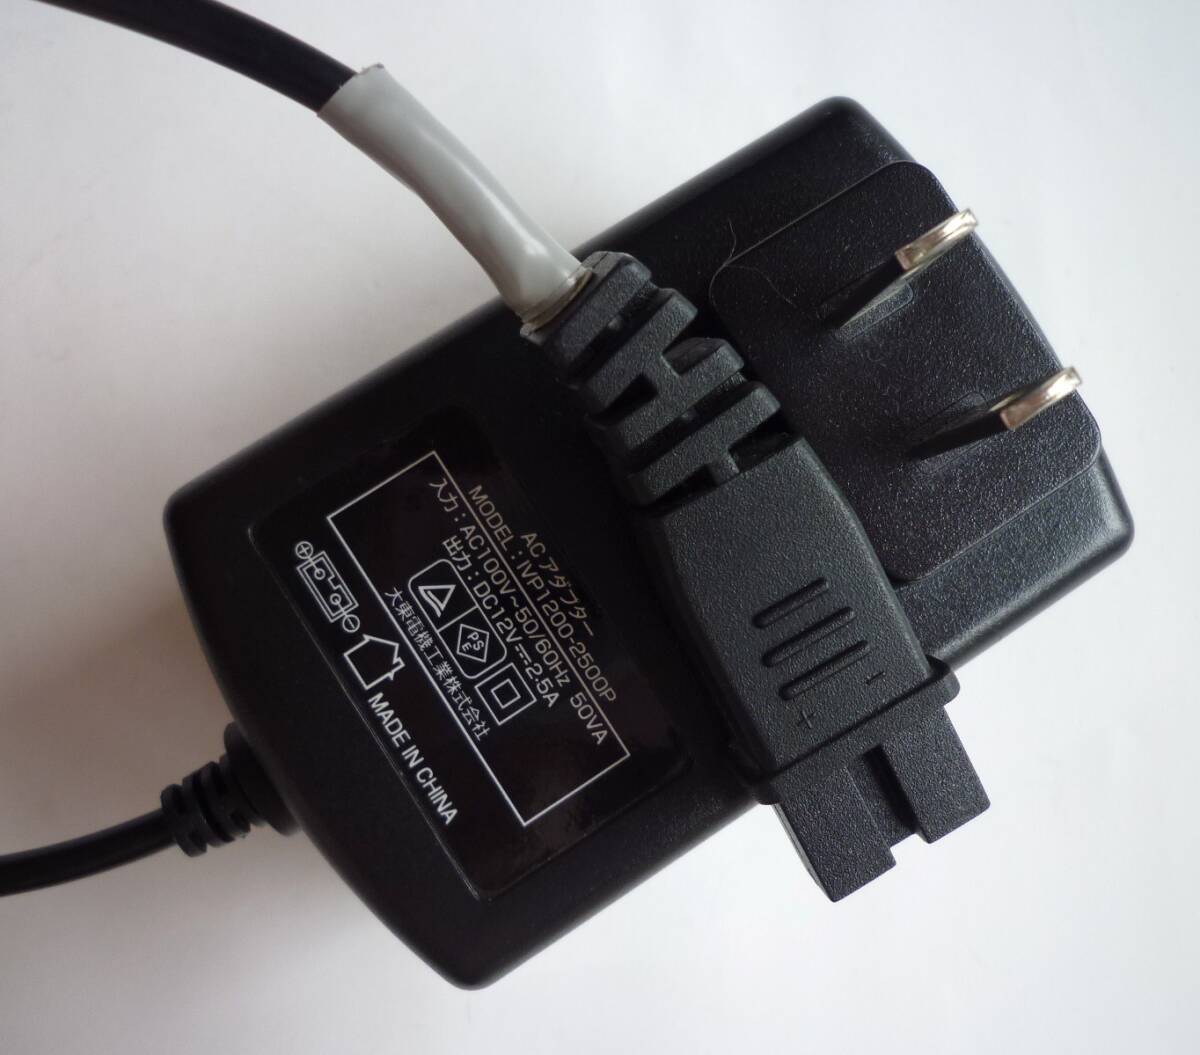  translation have large higashi electro- machine industry AC adaptor power supply adapter IVP1200-2500P power supply adaptor 12V 2.5As Live massager for 